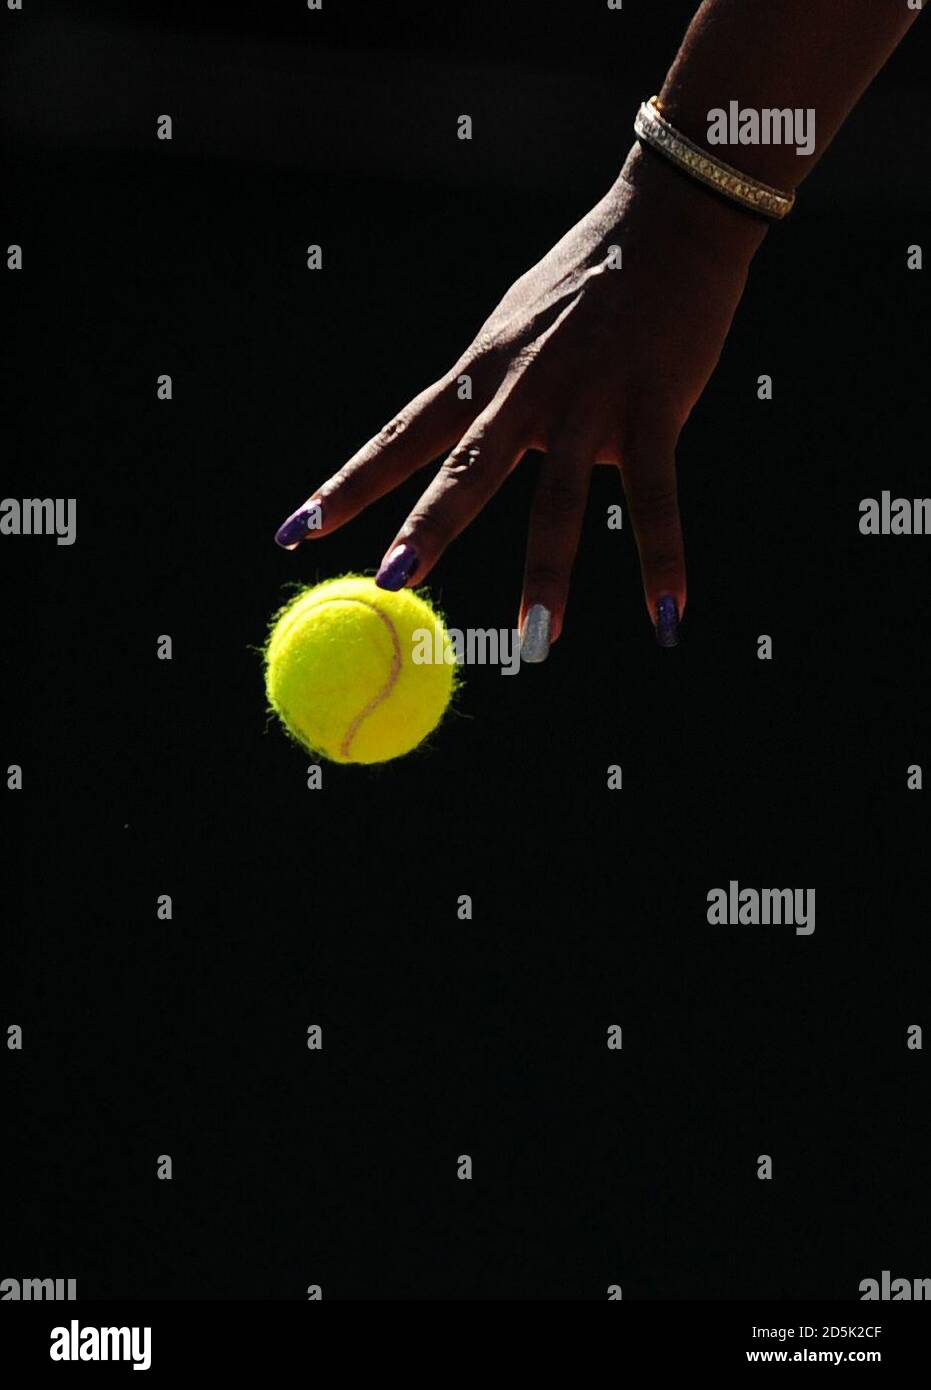 A close up of USA's Serena Williams nails during her match against Russia's Maria Kirilenko on day six of the 2011 Wimbledon Championships at the All England Lawn Tennis and Croquet Club, Wimbledon. Stock Photo